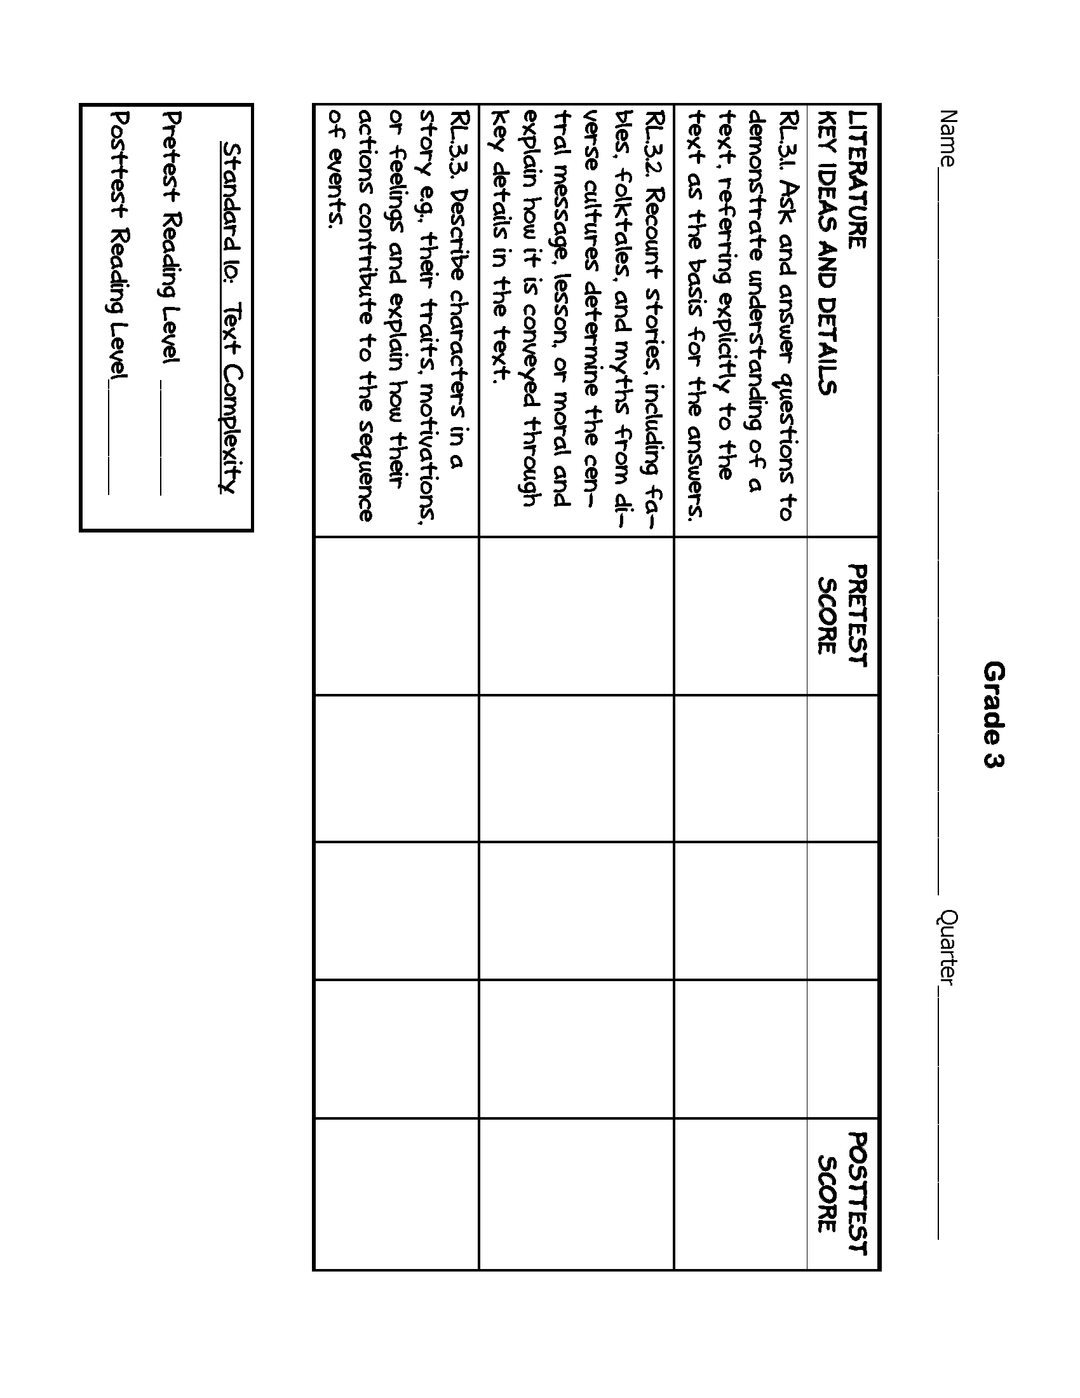 Common Core Charts, Organizers & Progress Forms For Every Standard: Grade 3